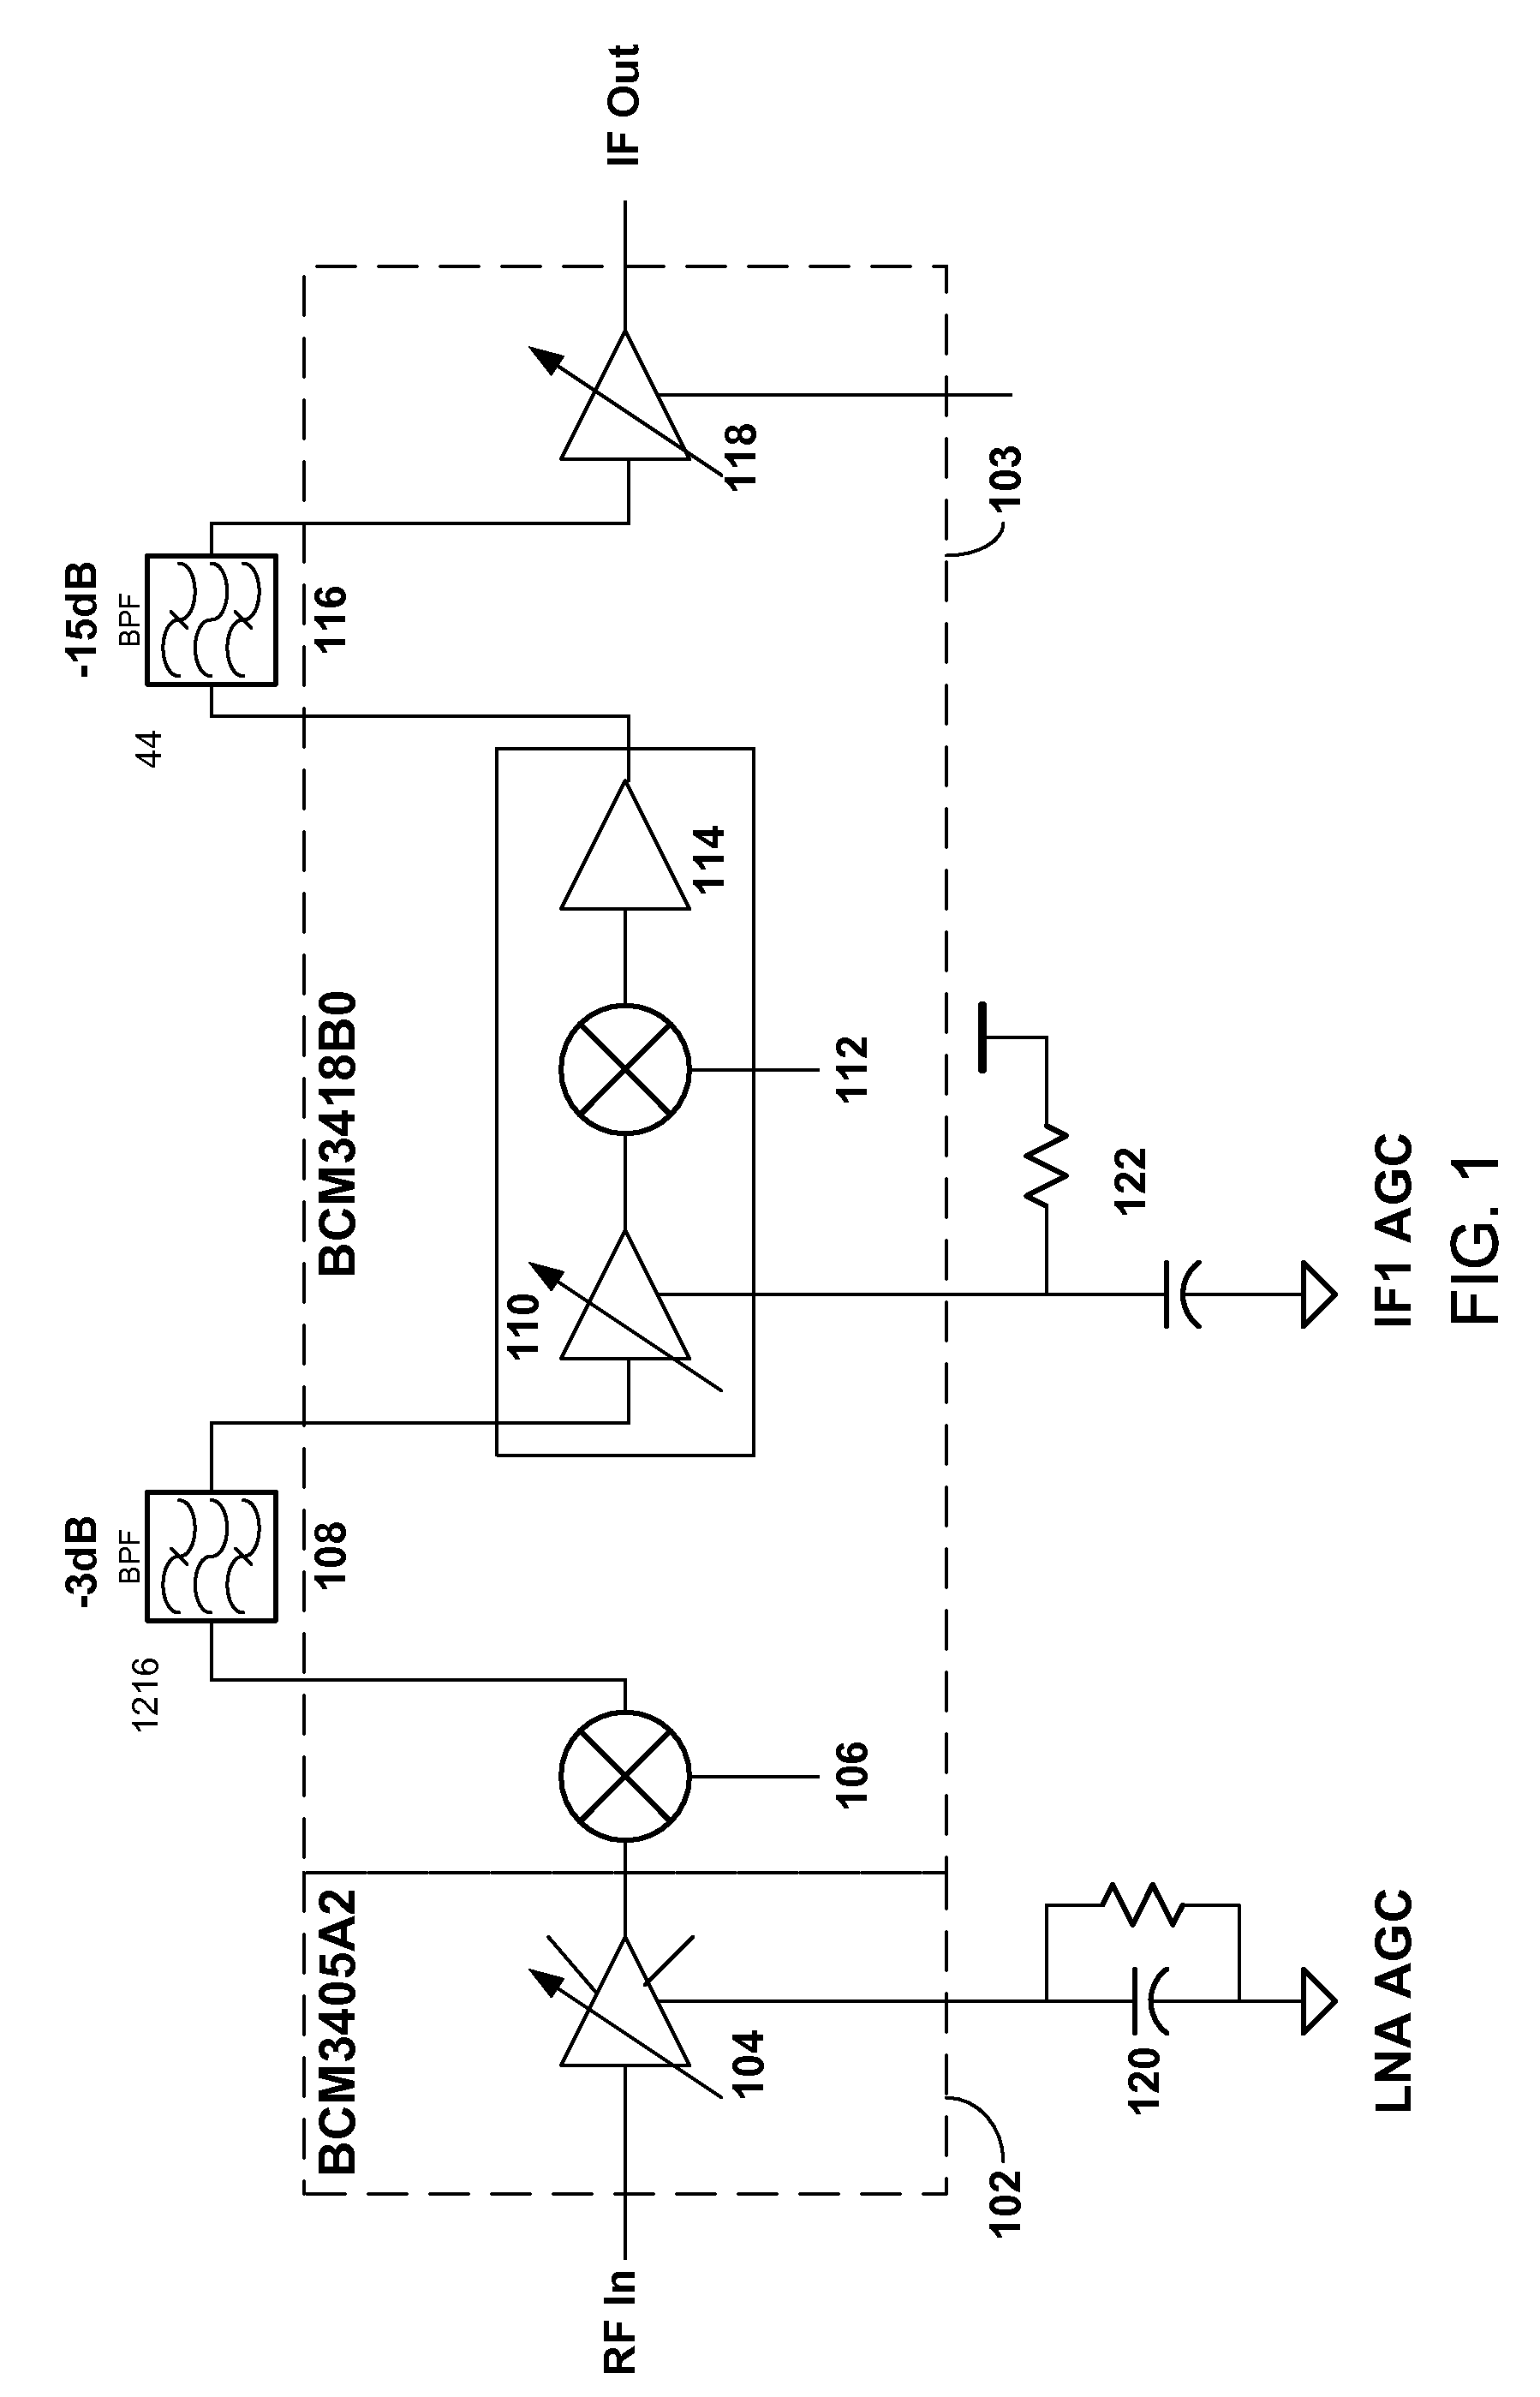 SYSTEMS AND METHODS FOR PROVIDING A MoCA COMPATABILITY STRATEGY